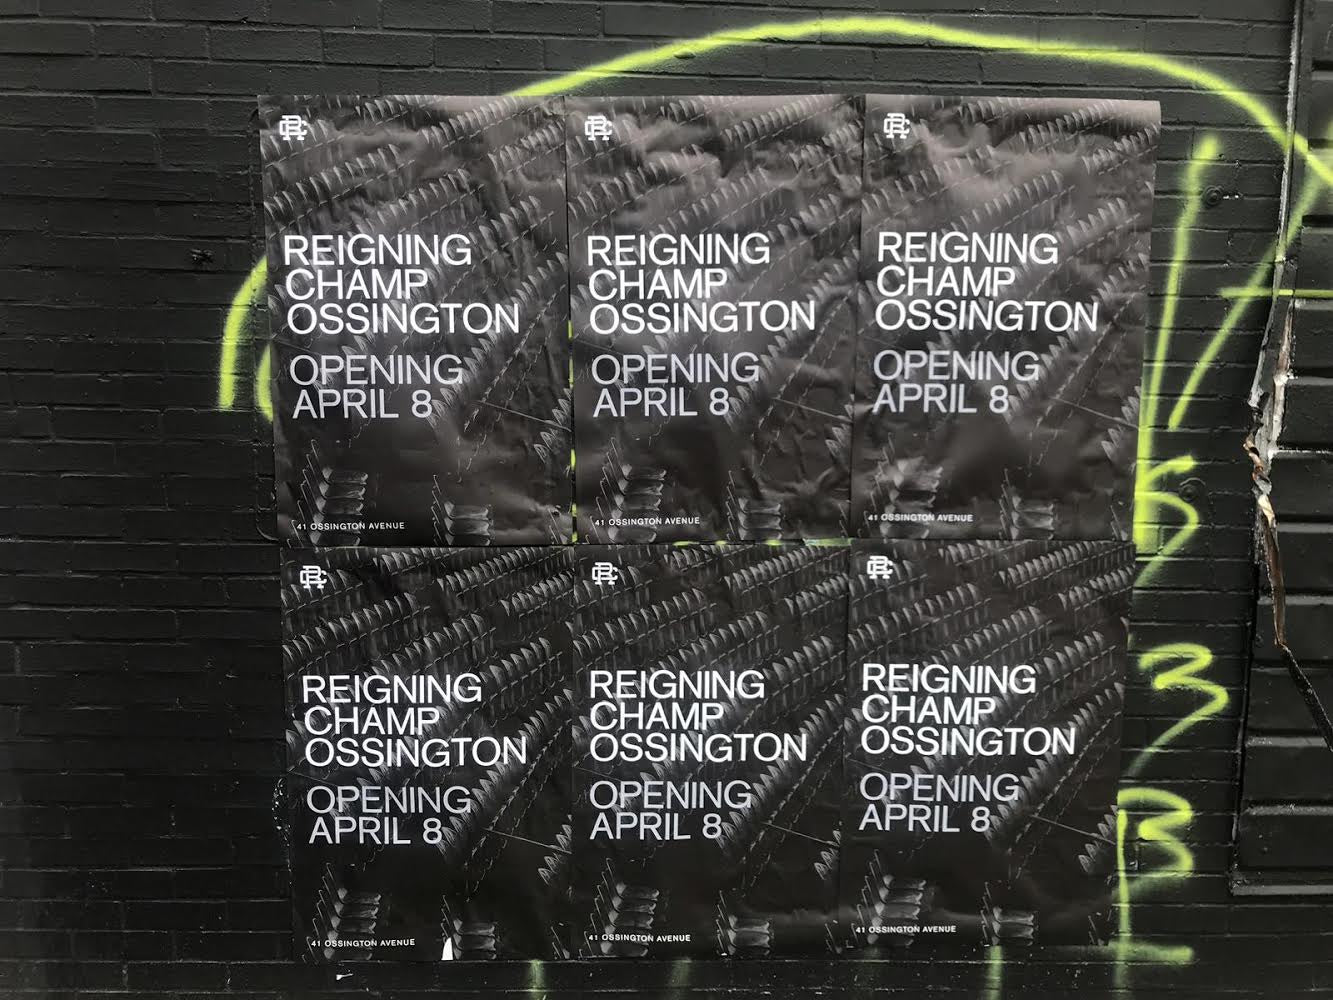 Reigning Champ Ossington - wheat paste posters